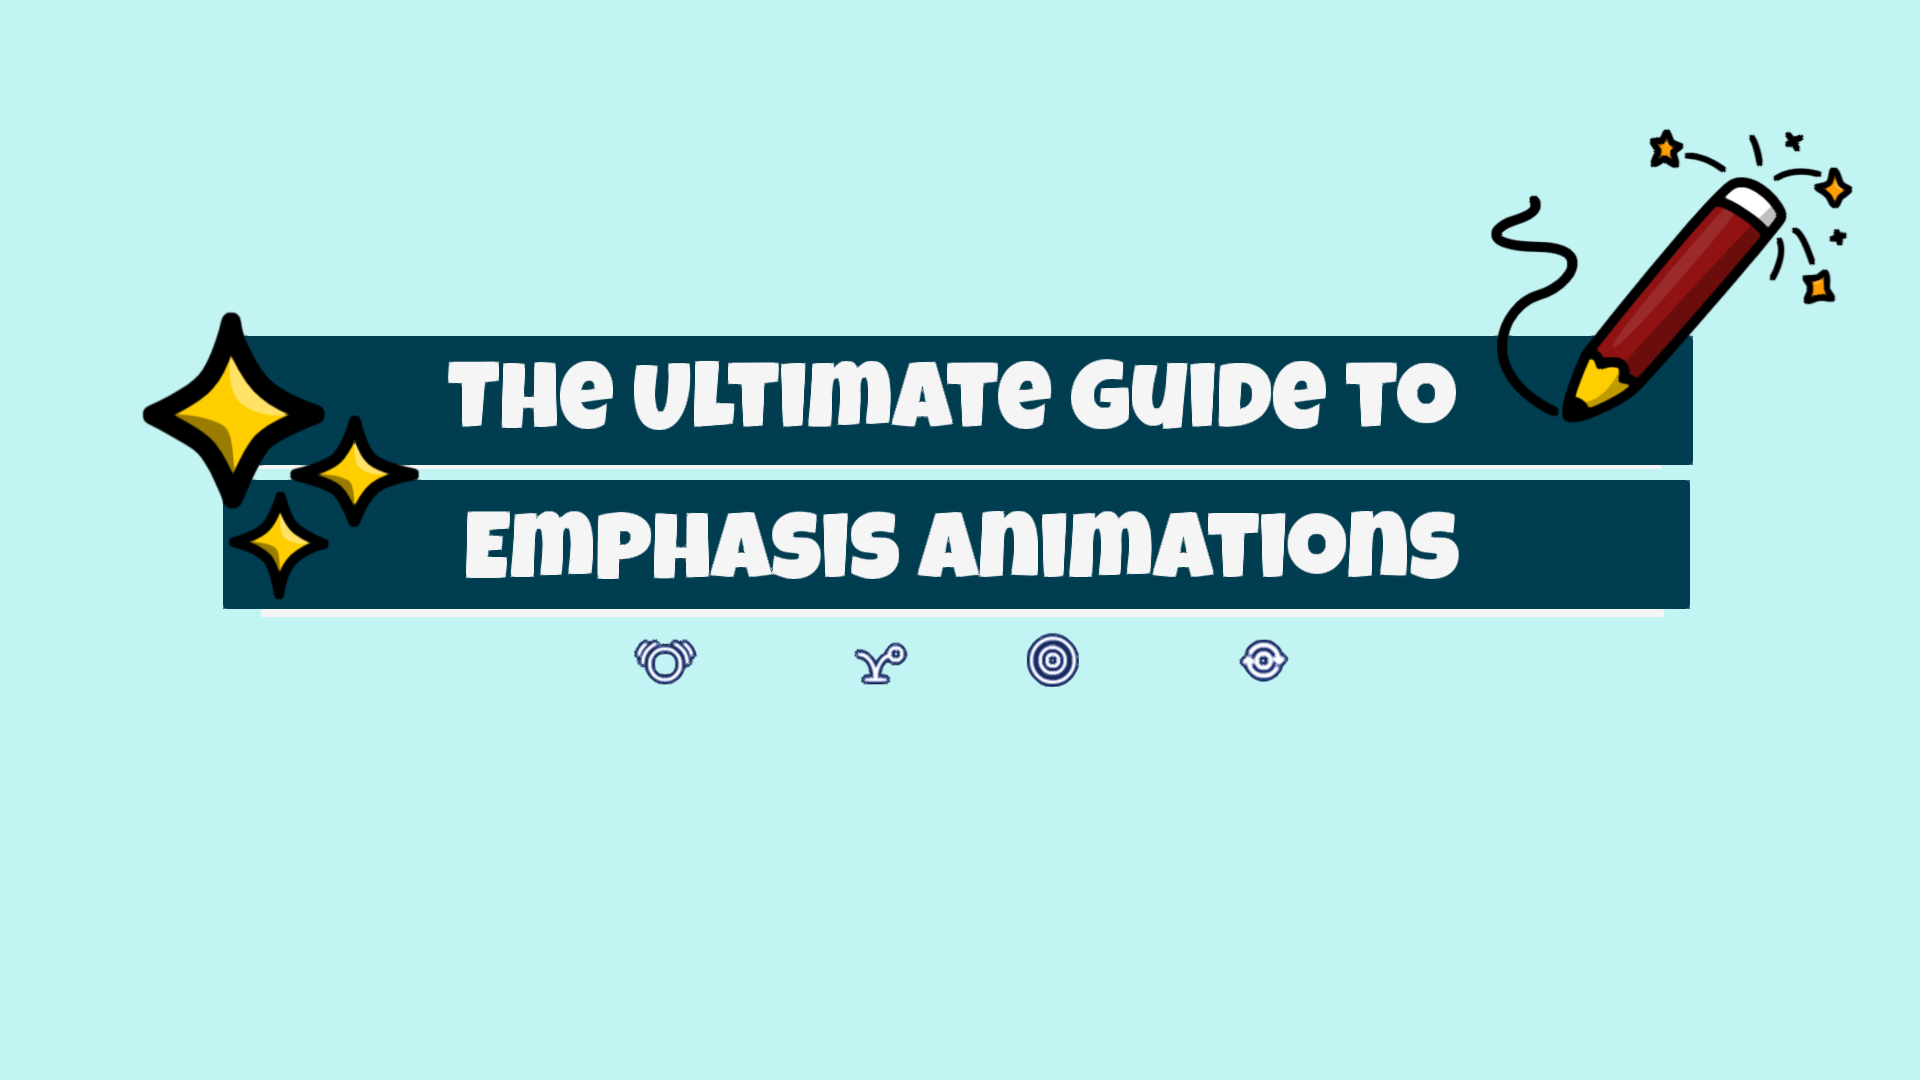 The Ultimate Guide to Emphasis Animations